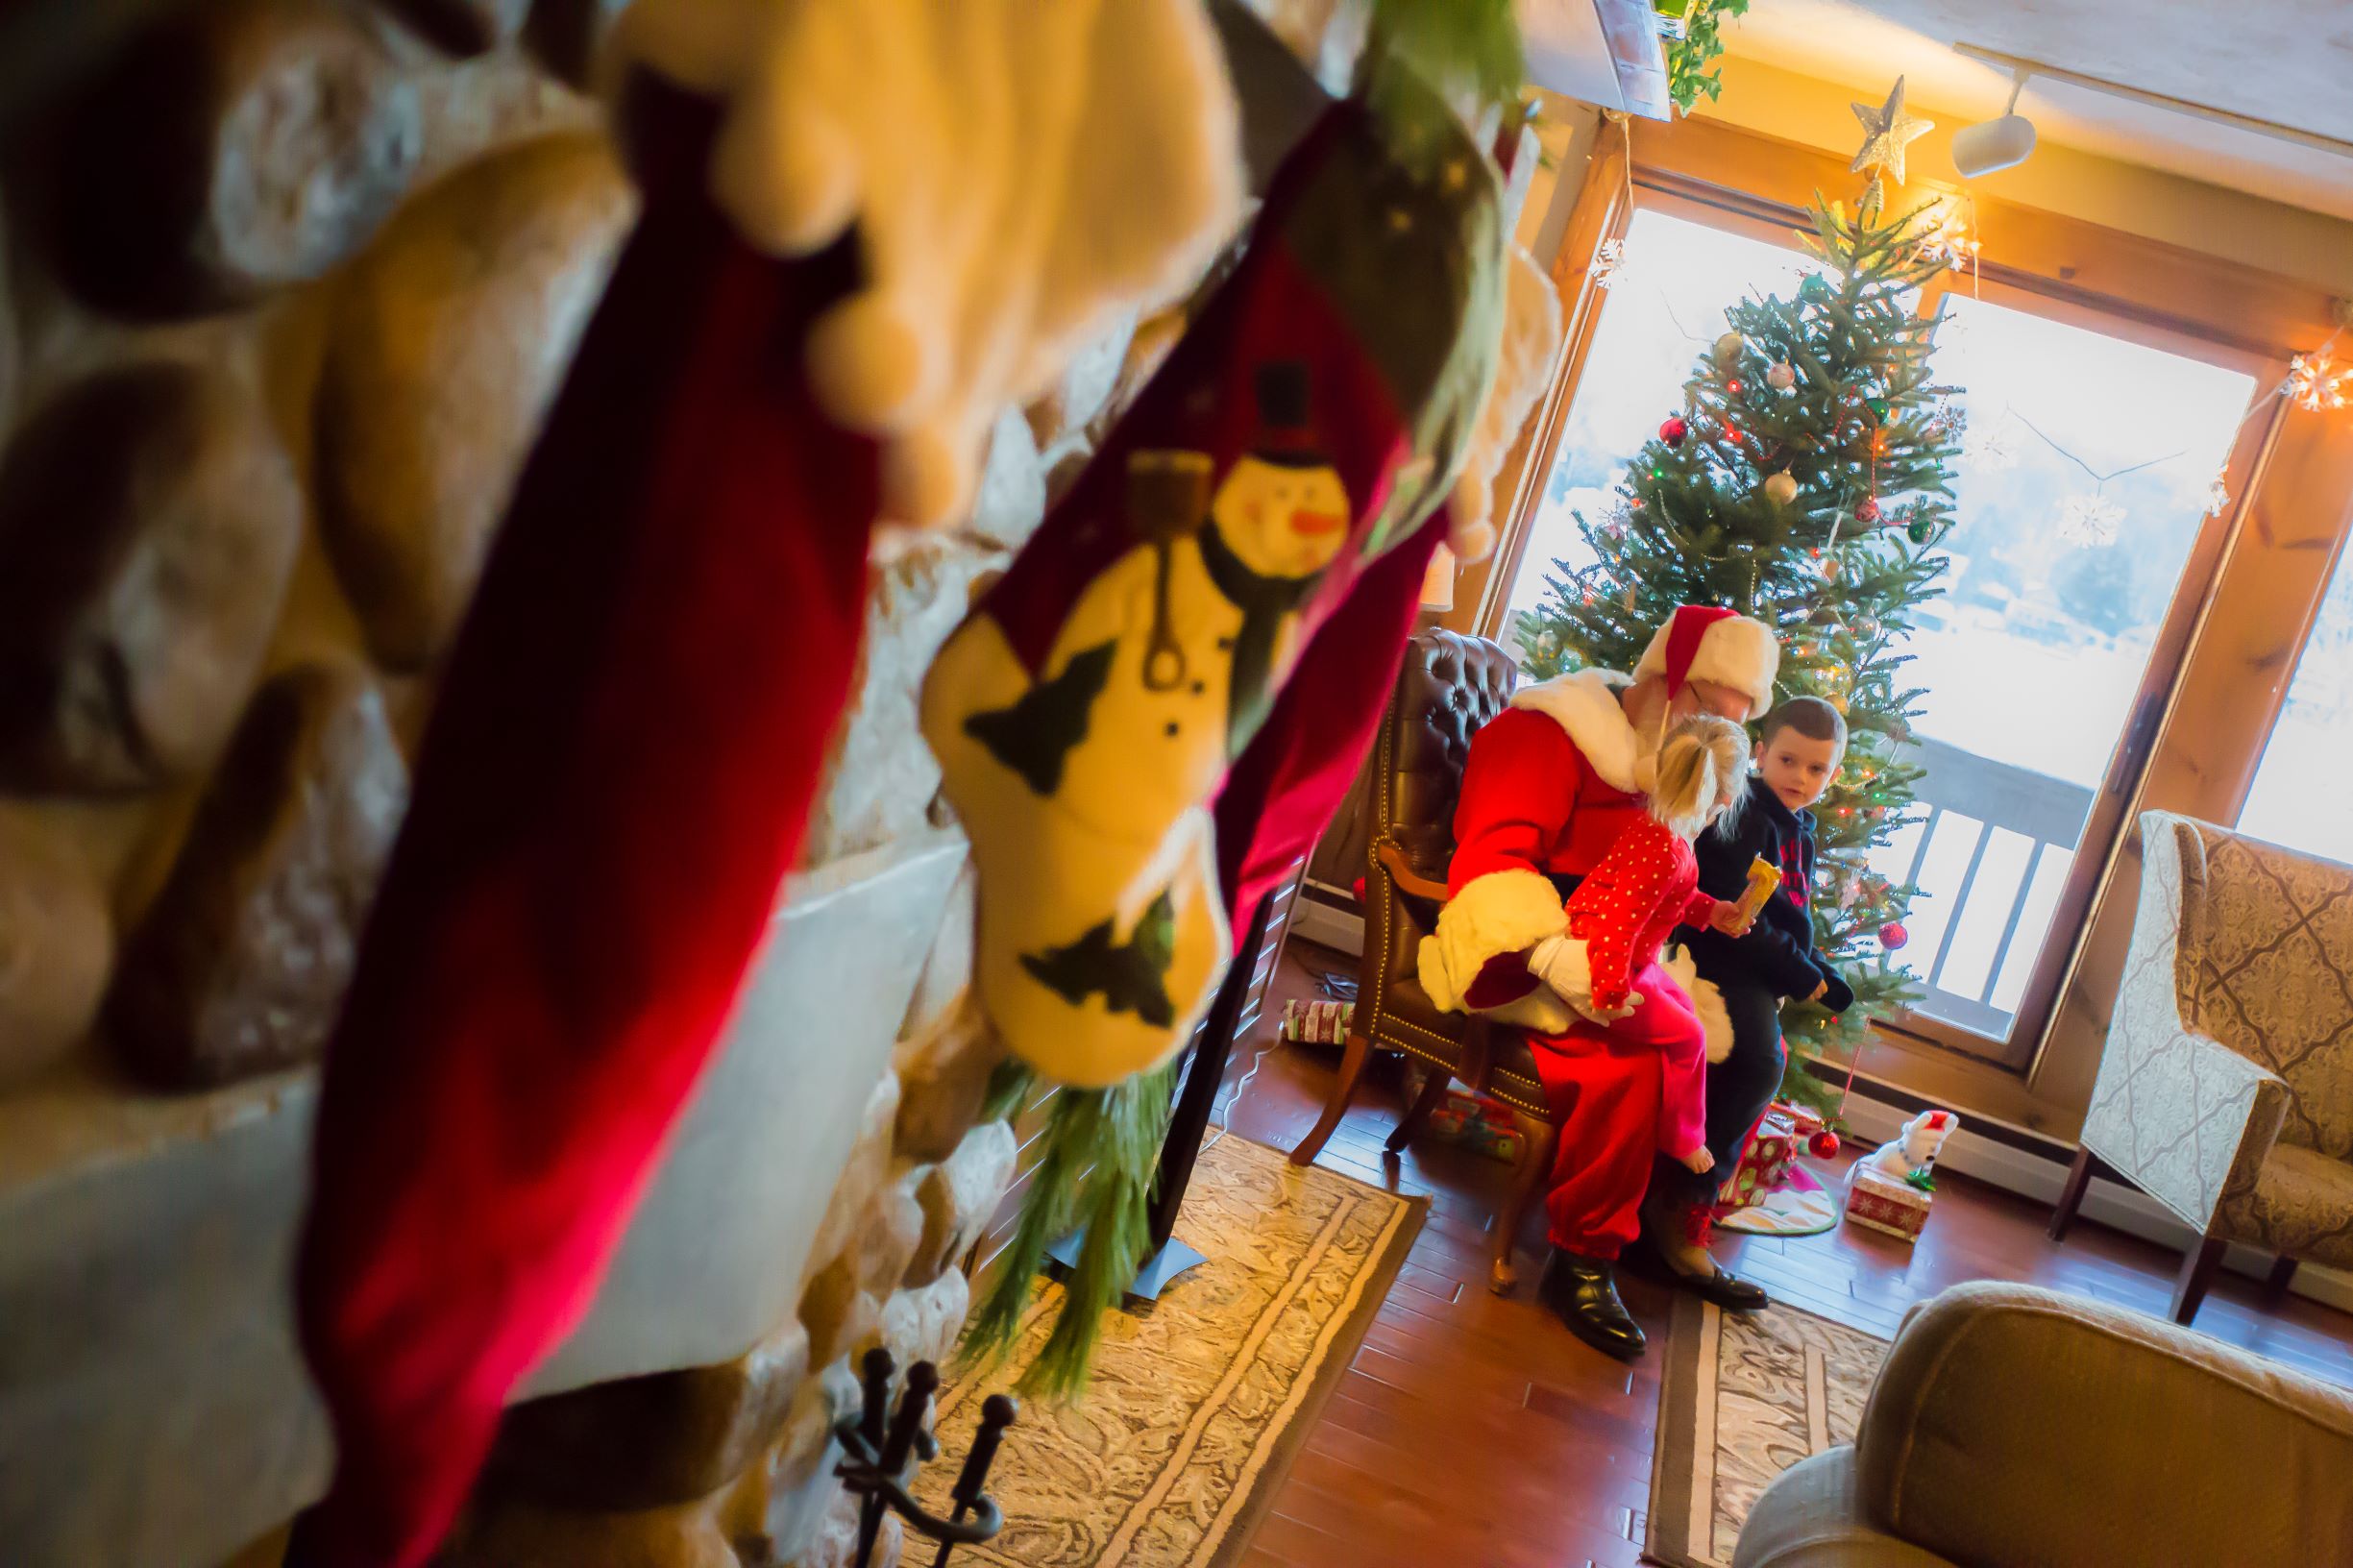 Santa Claus Plans Stop in Old Forge, New York